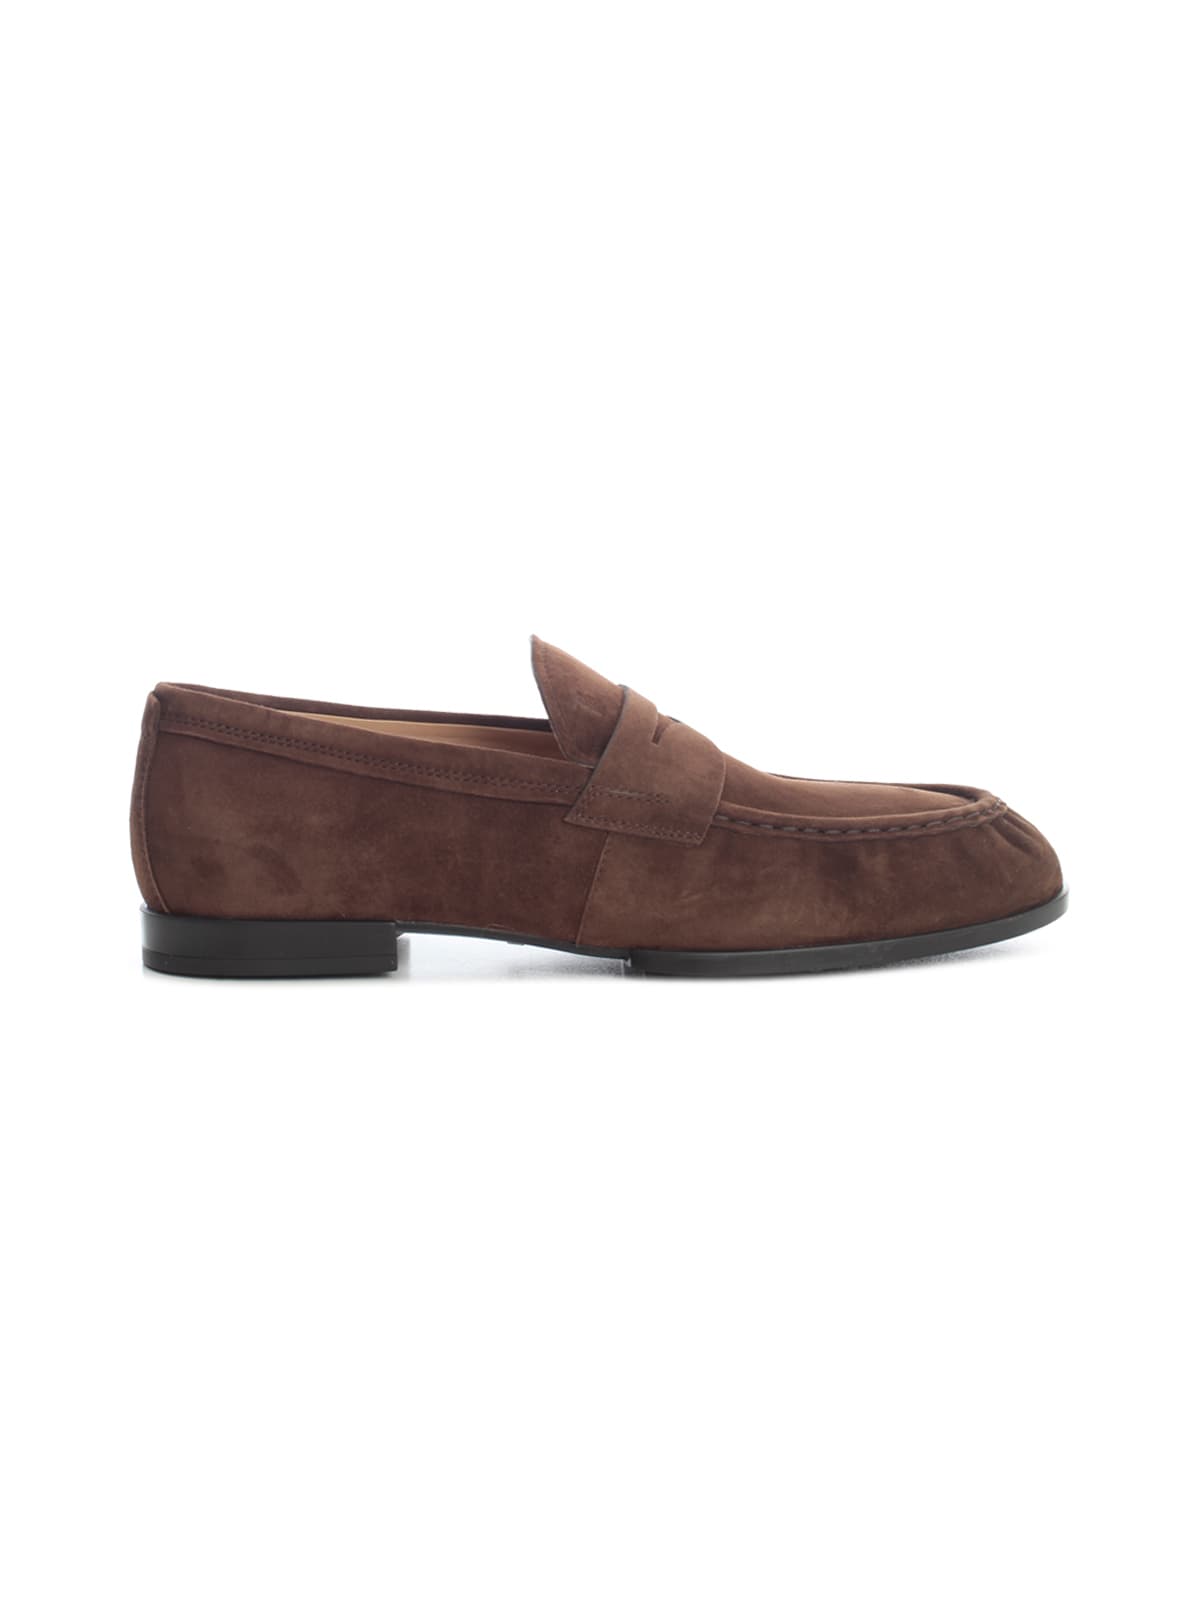 Tods Amalfi Suede Loafers